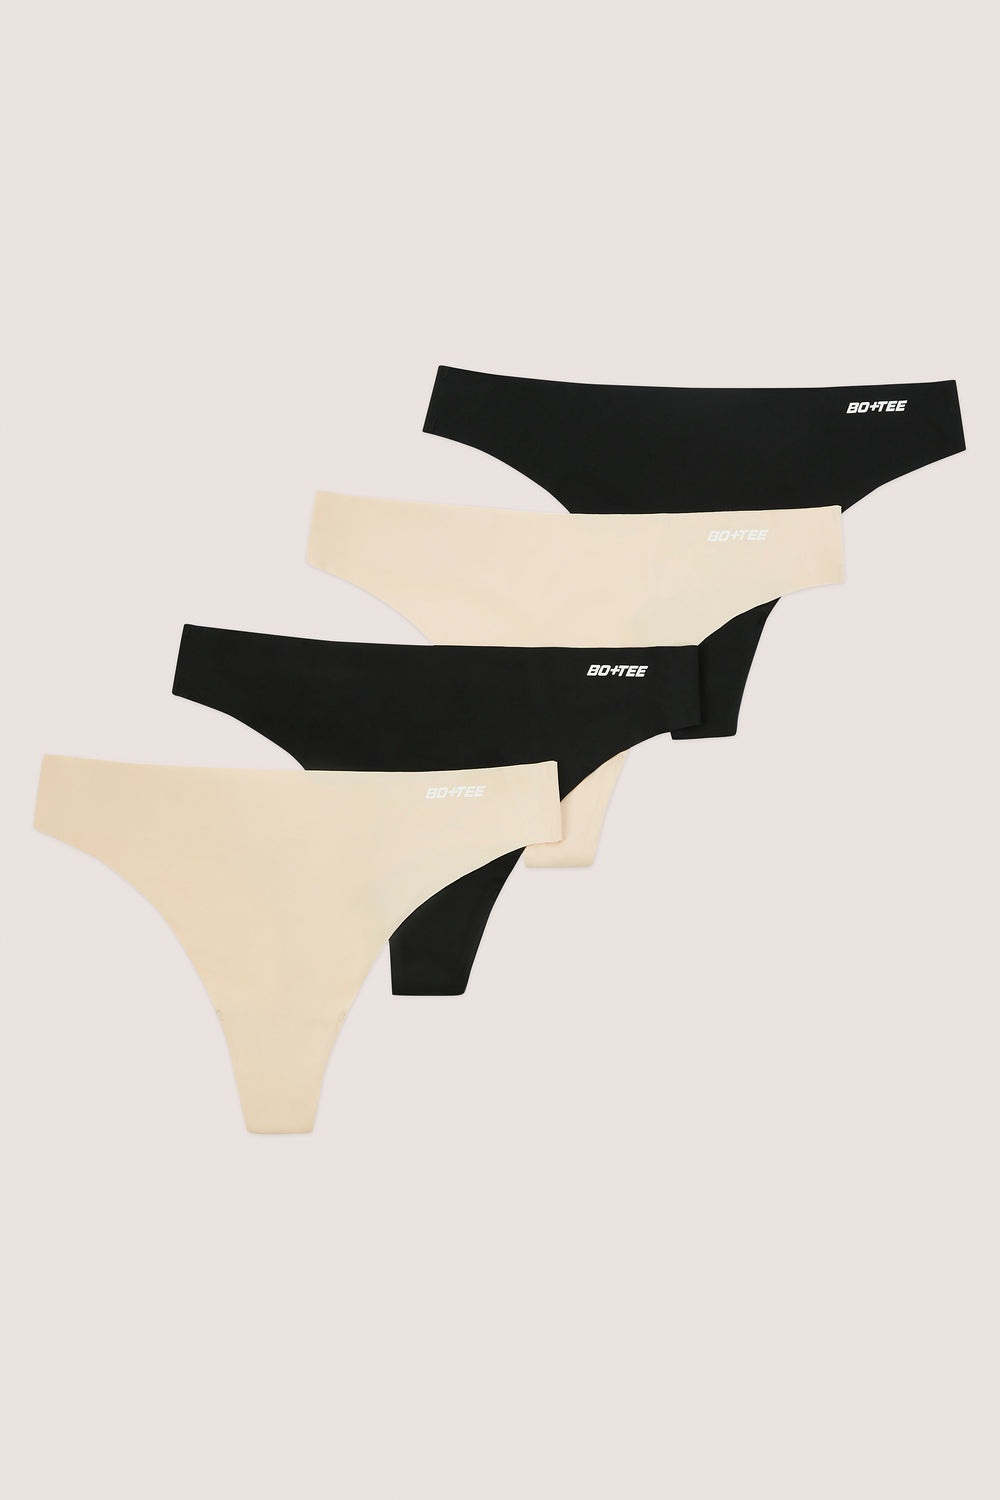 Loving this deal! 5 pack of seamless thong underwear by